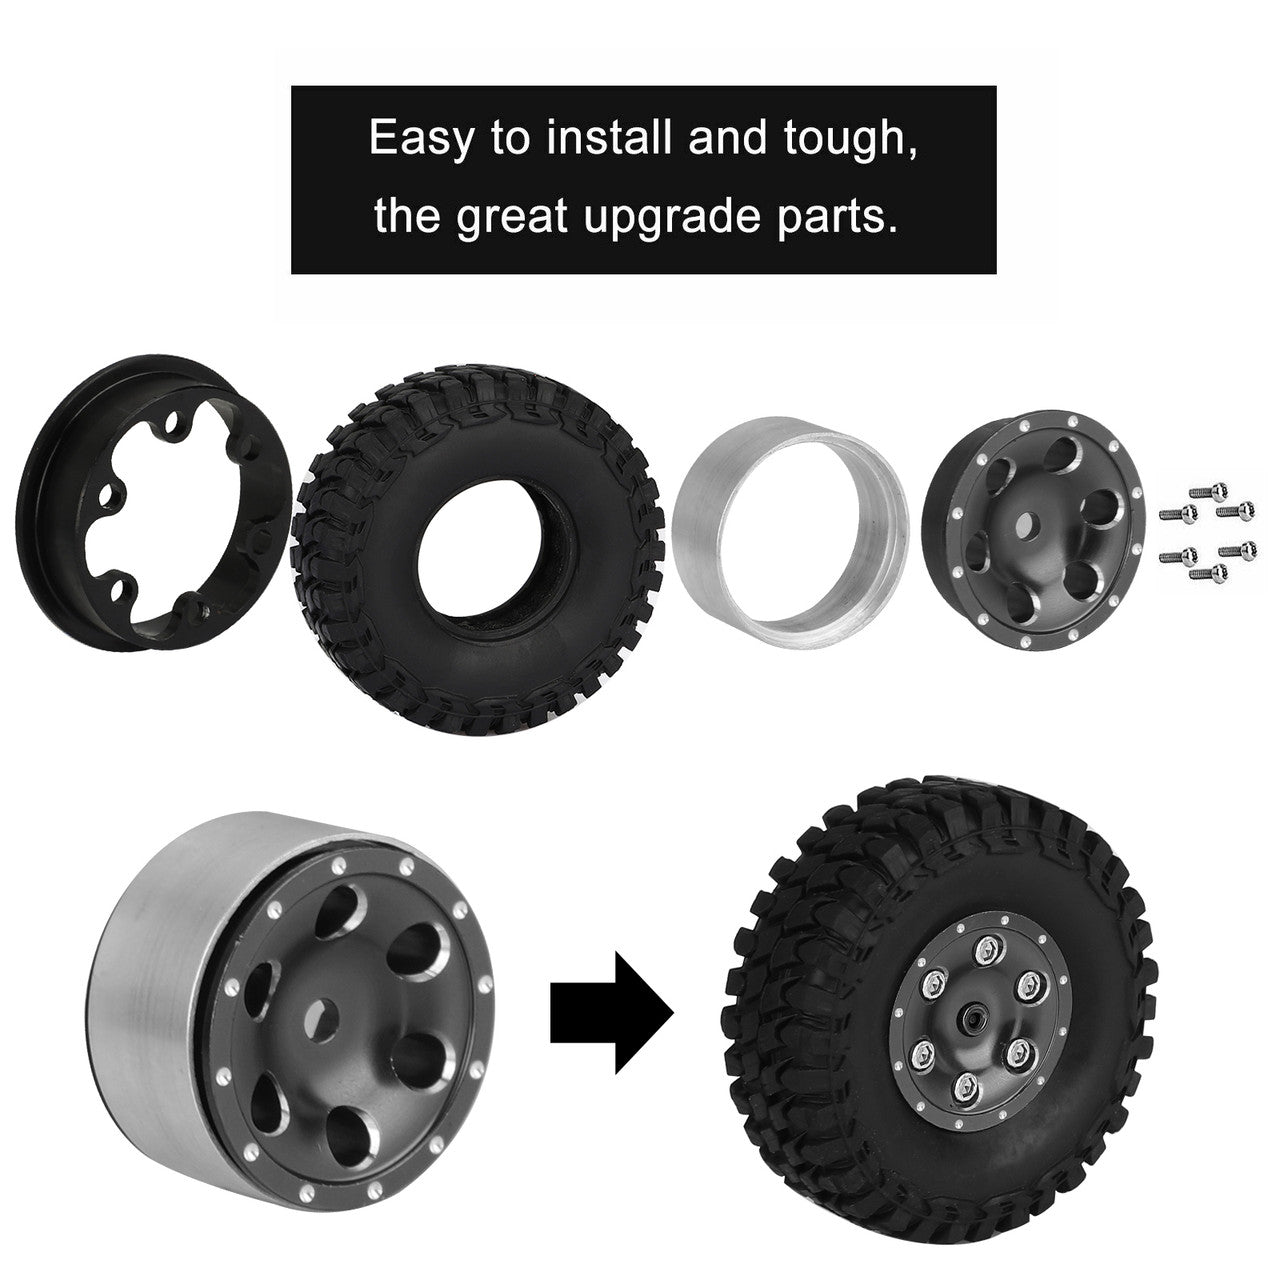 1.0 Bead lock Wheel Rims for 1/24 RC Crawler-the Wheel Rims Are Made of Quality Aluminum Alloy, CNC Machined for Precision